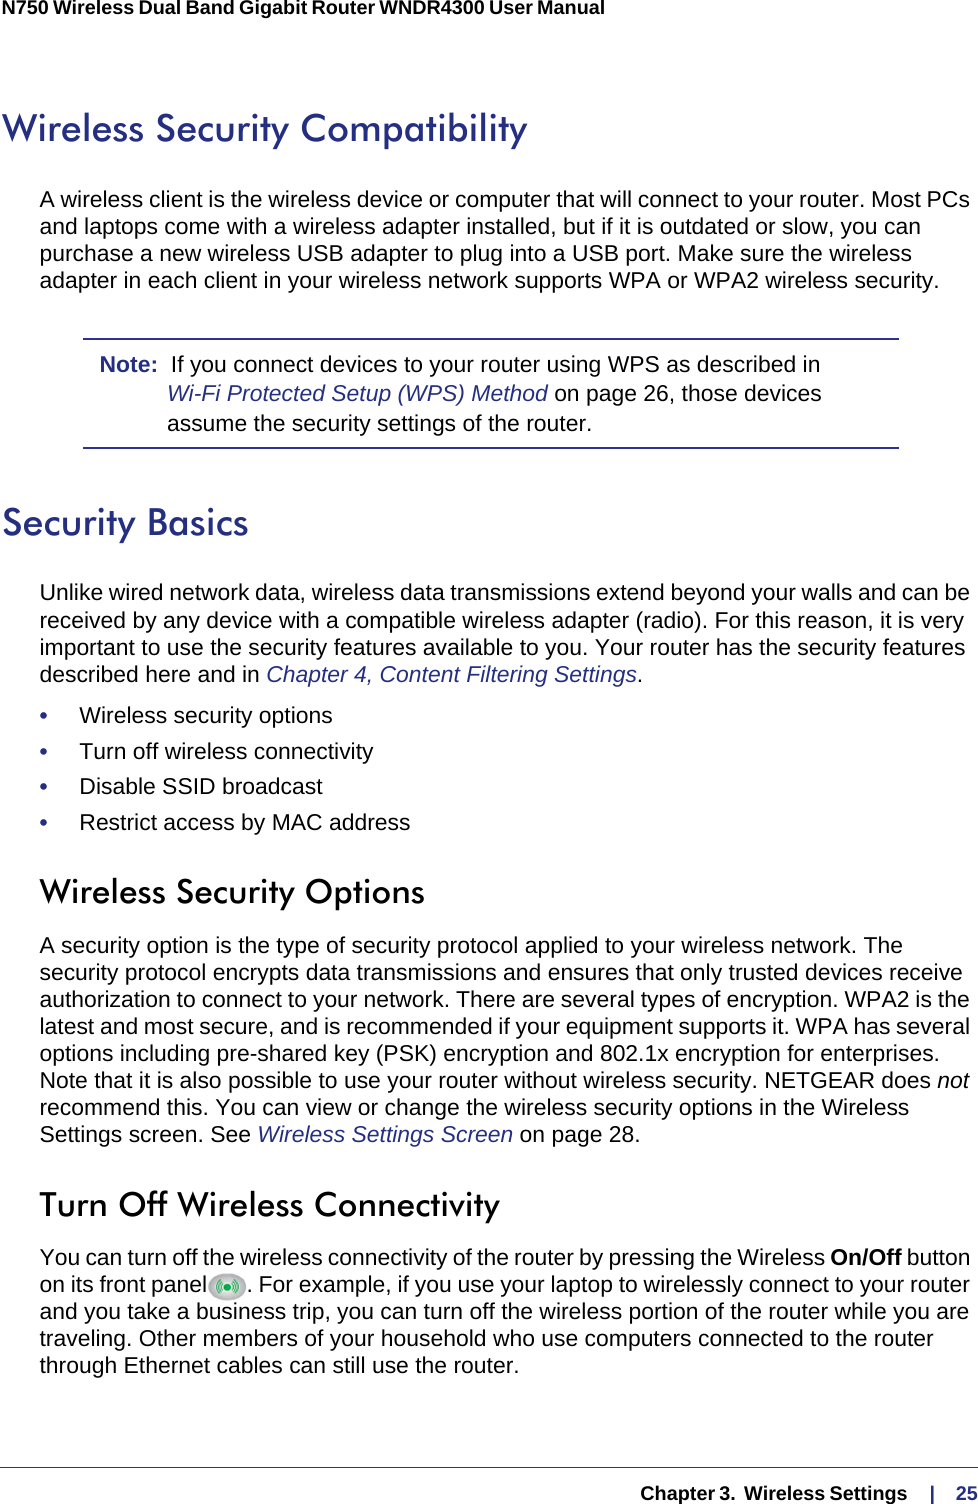   Chapter 3.  Wireless Settings     |    25N750 Wireless Dual Band Gigabit Router WNDR4300 User Manual Wireless Security CompatibilityA wireless client is the wireless device or computer that will connect to your router. Most PCs and laptops come with a wireless adapter installed, but if it is outdated or slow, you can purchase a new wireless USB adapter to plug into a USB port. Make sure the wireless adapter in each client in your wireless network supports WPA or WPA2 wireless security. Note:  If you connect devices to your router using WPS as described in Wi-Fi Protected Setup (WPS) Method on page  26, those devices assume the security settings of the router.Security BasicsUnlike wired network data, wireless data transmissions extend beyond your walls and can be received by any device with a compatible wireless adapter (radio). For this reason, it is very important to use the security features available to you. Your router has the security features described here and in Chapter 4, Content Filtering Settings.•     Wireless security options•     Turn off wireless connectivity•     Disable SSID broadcast•     Restrict access by MAC addressWireless Security OptionsA security option is the type of security protocol applied to your wireless network. The security protocol encrypts data transmissions and ensures that only trusted devices receive authorization to connect to your network. There are several types of encryption. WPA2 is the latest and most secure, and is recommended if your equipment supports it. WPA has several options including pre-shared key (PSK) encryption and 802.1x encryption for enterprises. Note that it is also possible to use your router without wireless security. NETGEAR does not recommend this. You can view or change the wireless security options in the Wireless Settings screen. See Wireless Settings Screen on page  28.Turn Off Wireless ConnectivityYou can turn off the wireless connectivity of the router by pressing the Wireless On/Off button on its front panel . For example, if you use your laptop to wirelessly connect to your router and you take a business trip, you can turn off the wireless portion of the router while you are traveling. Other members of your household who use computers connected to the router through Ethernet cables can still use the router.